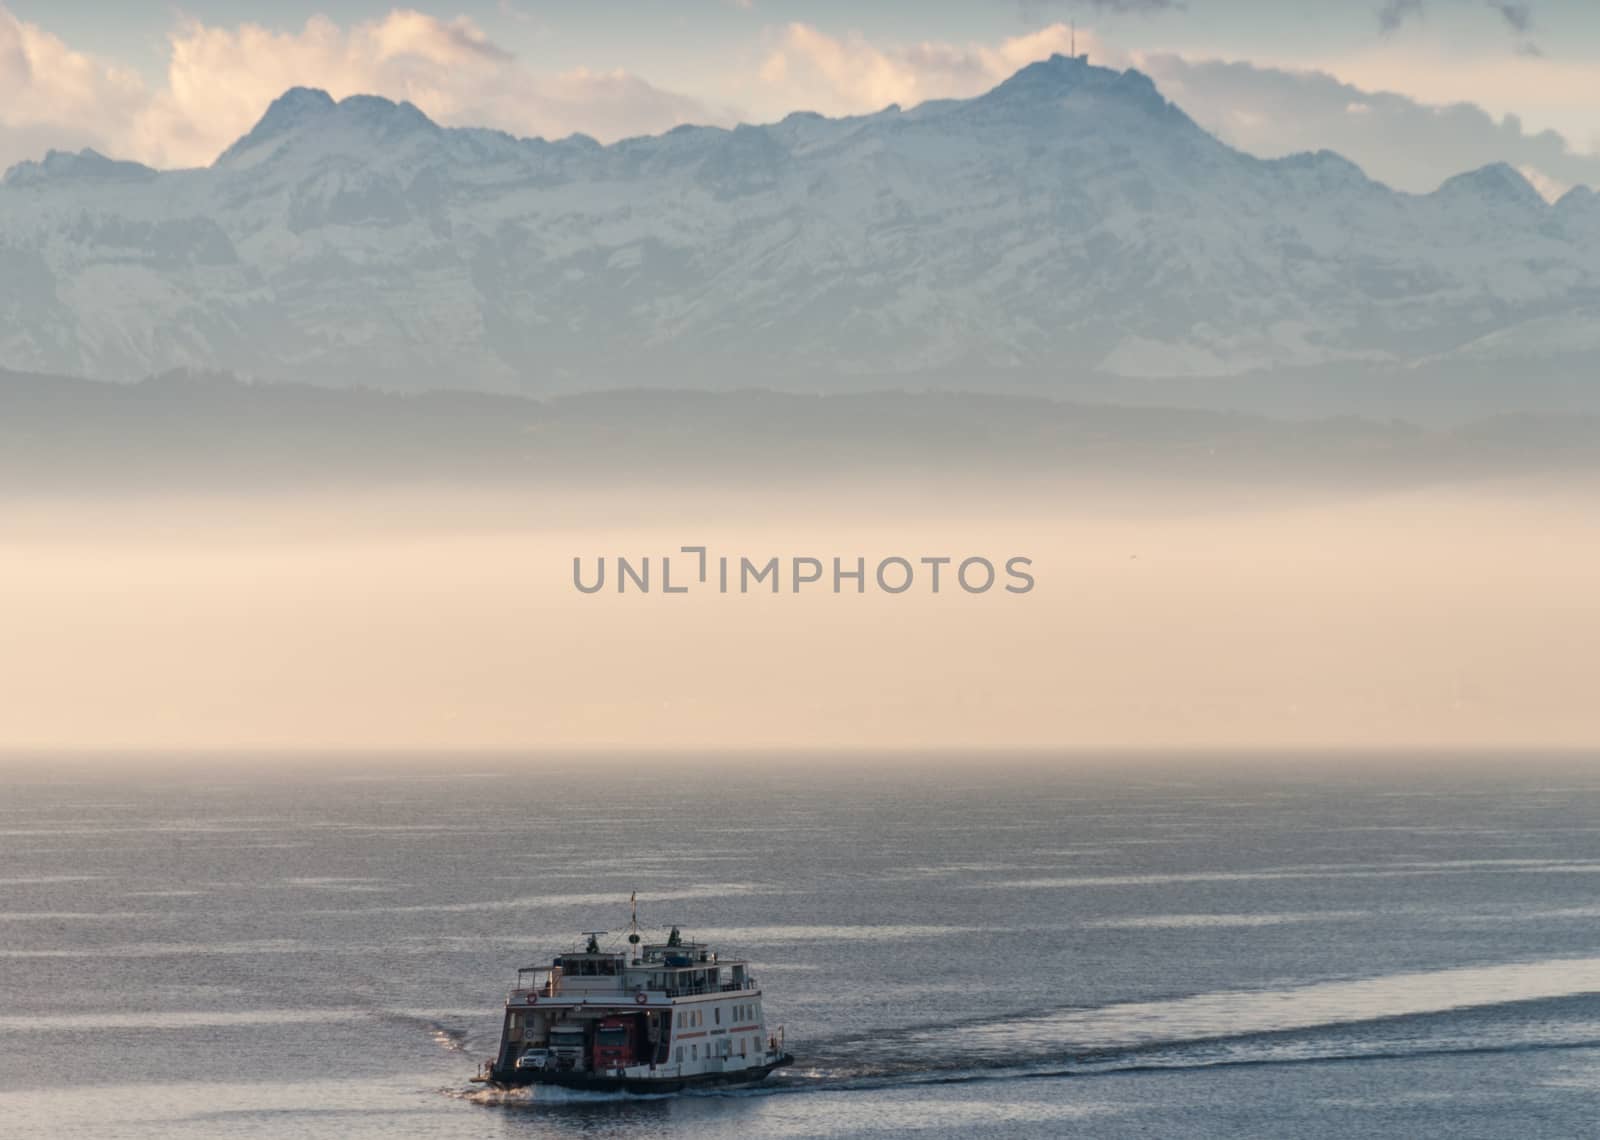 Ferry boat on a mountain lake with fog.